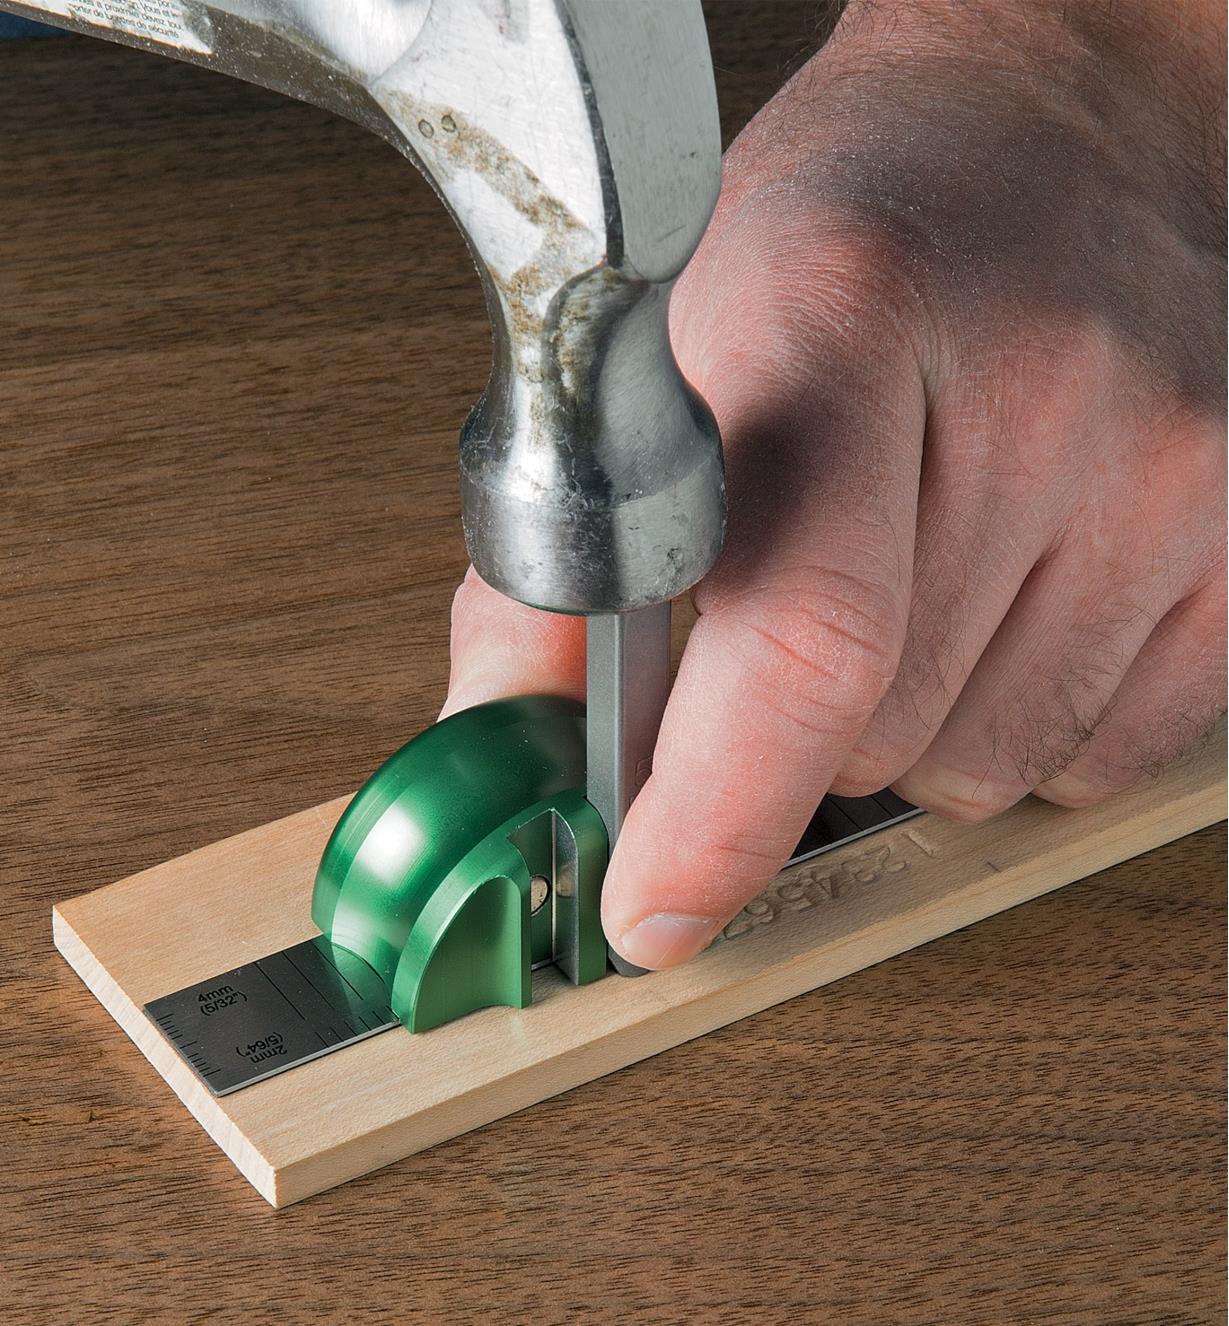 Tapping a stamp with a hammer to mark a letter in wood, using the spacing guide